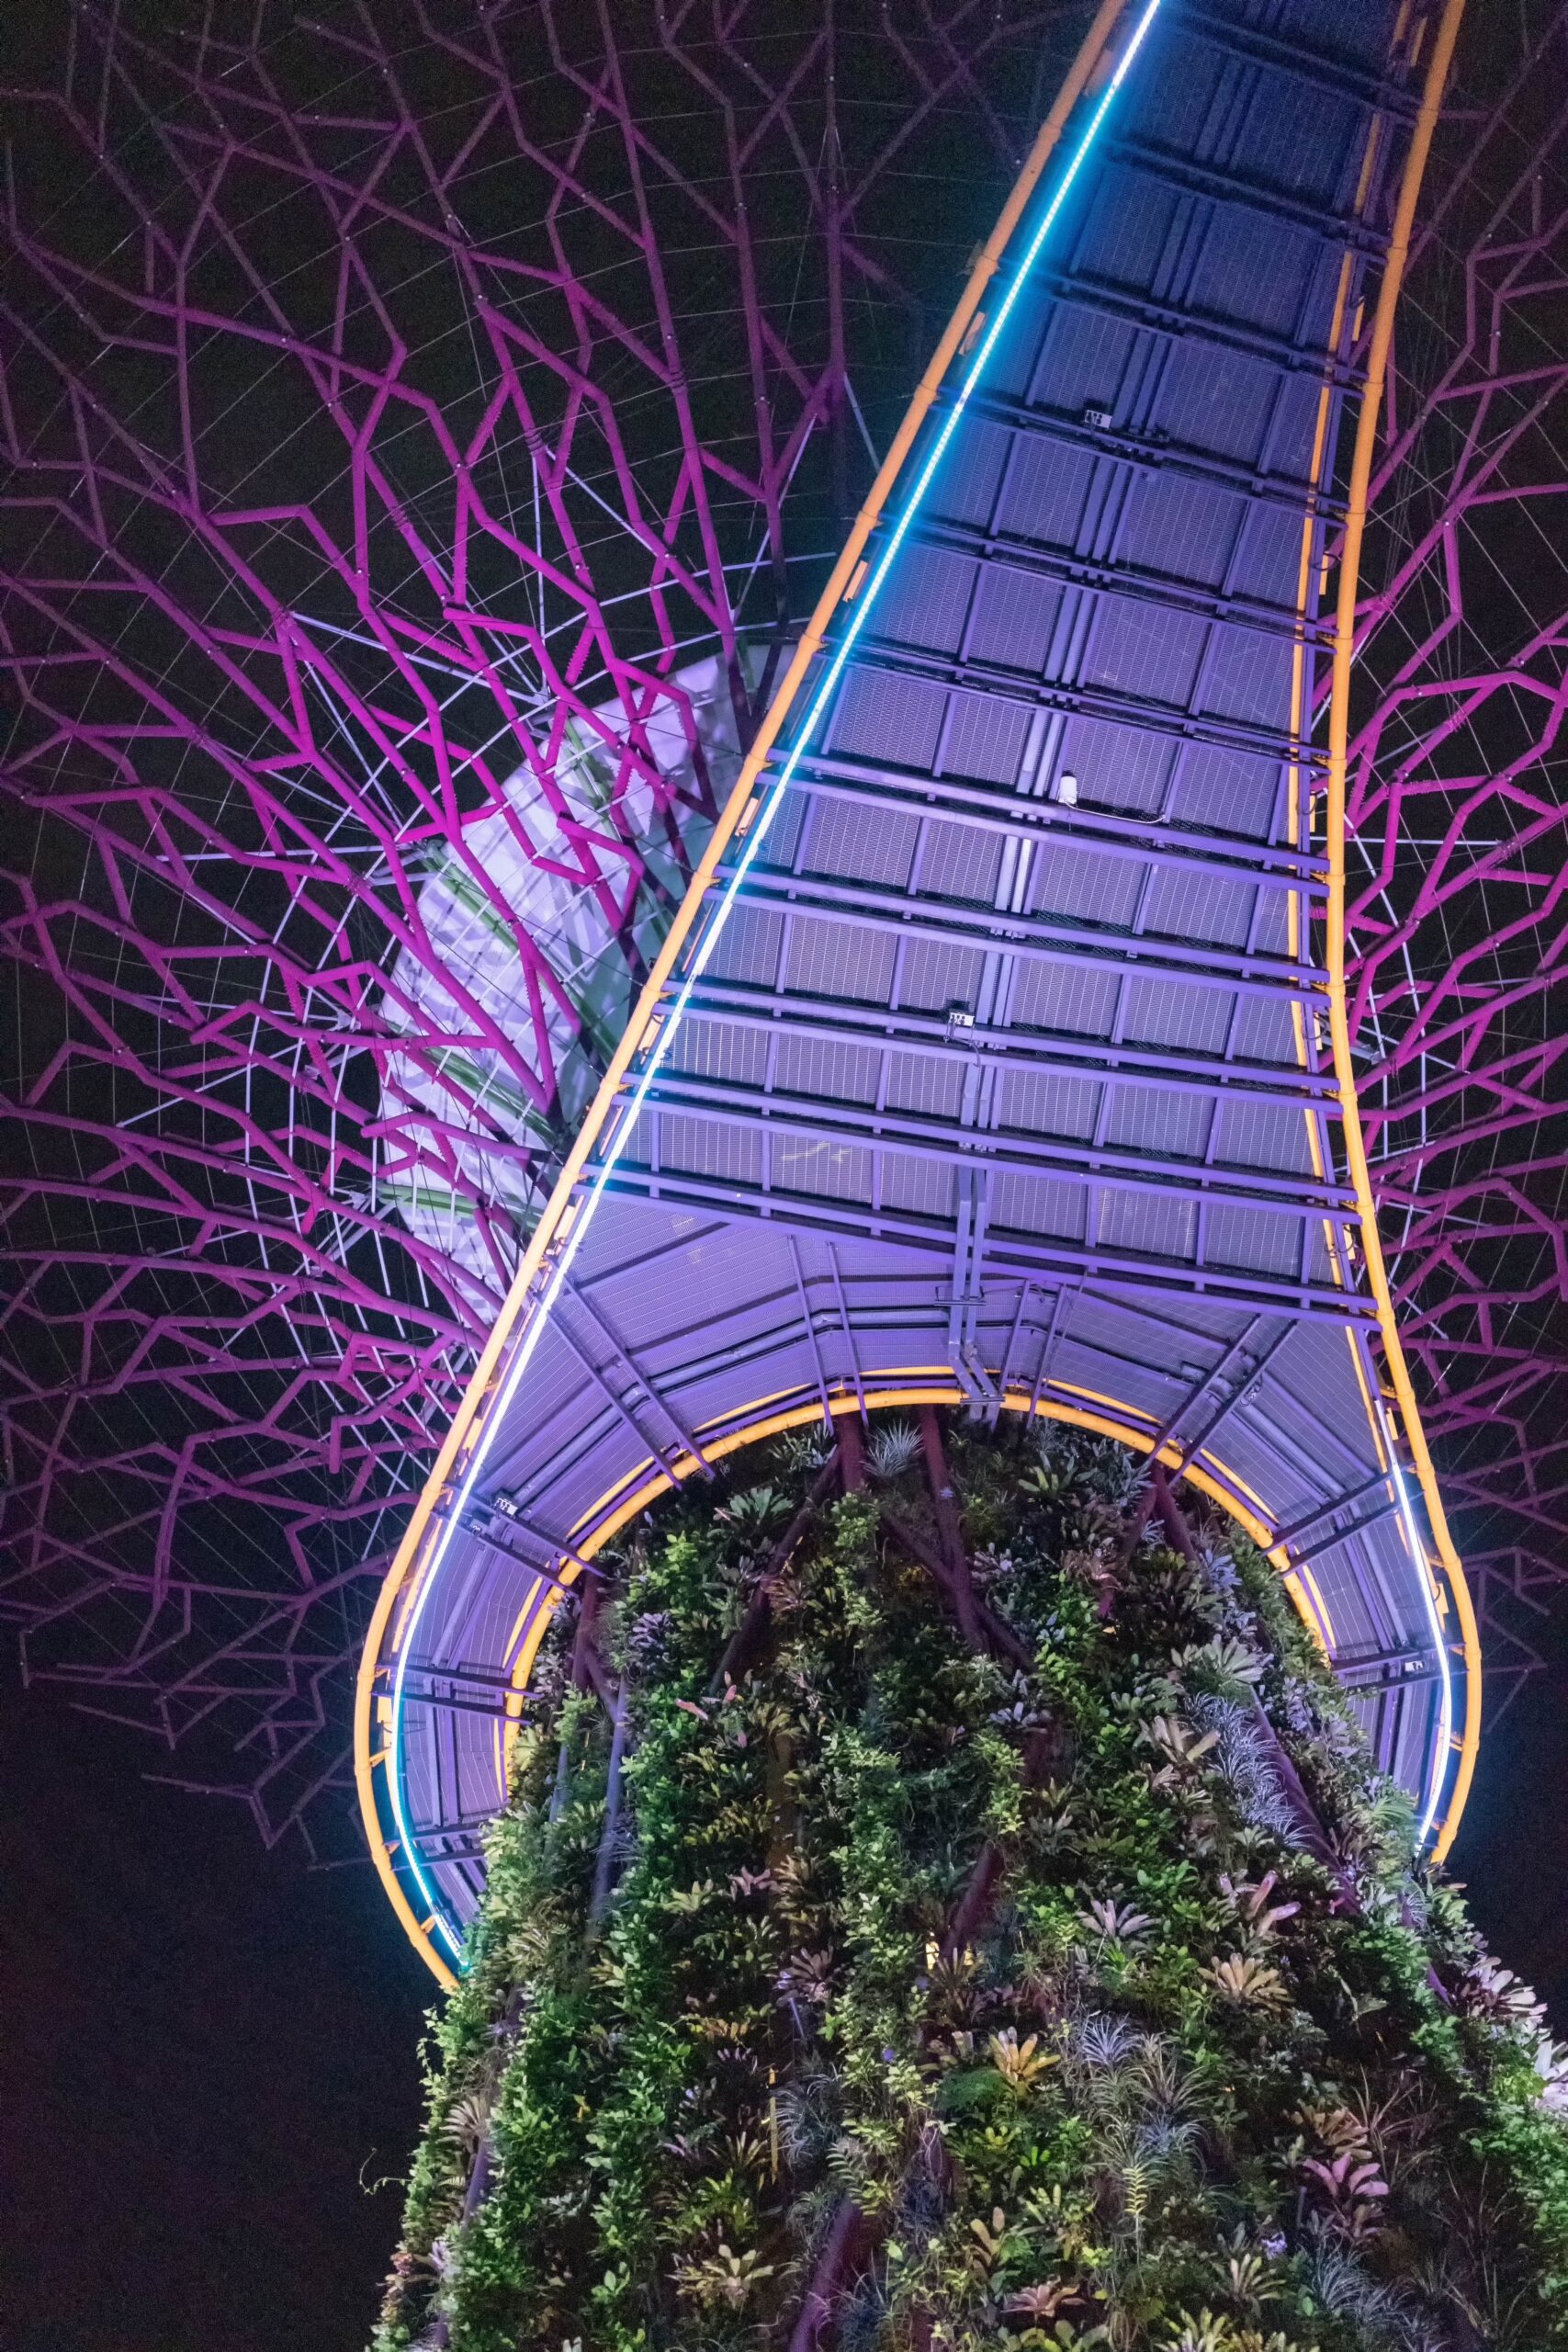 Supertree Groves in Singapore